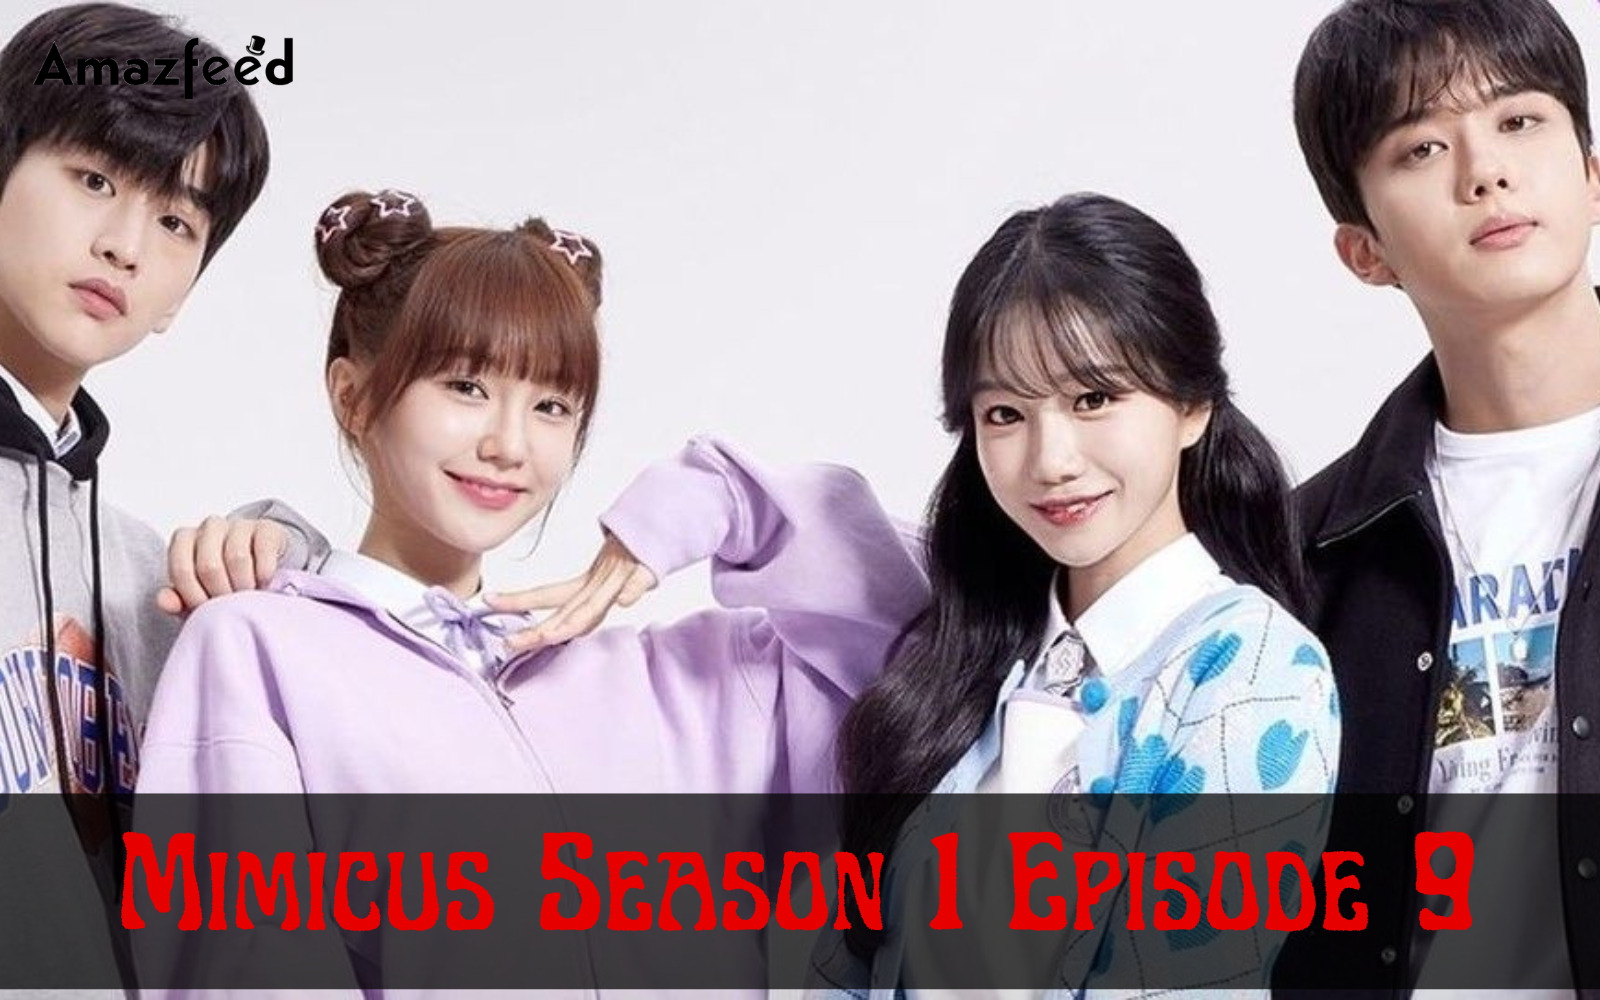 Mimicus Season 1 Episode 9 Expected Release Date